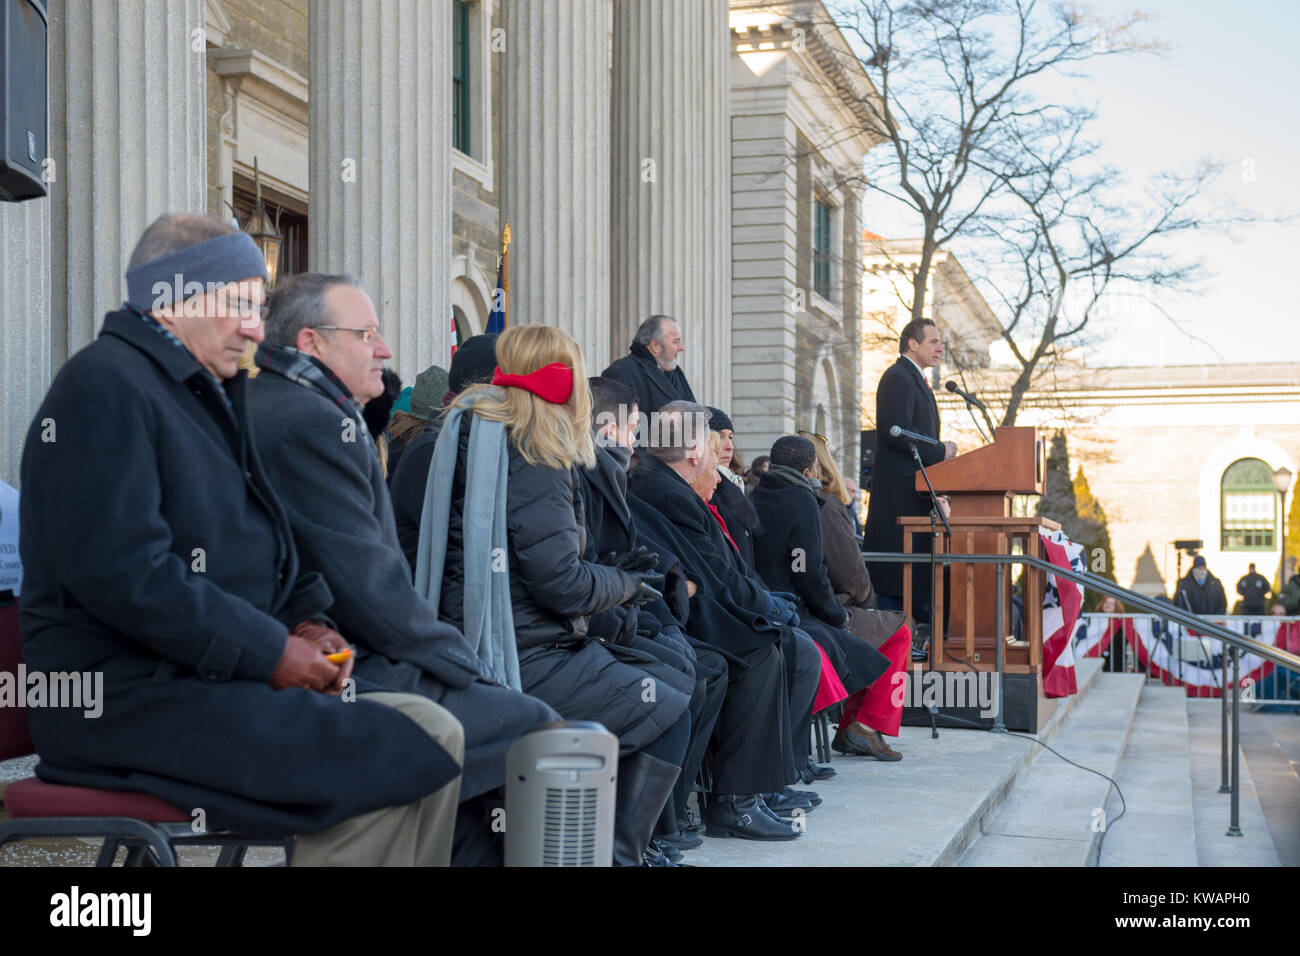 Mineola, United States. 01st Jan, 2018. Mineola, New York, USA. January 1, 2018. New York Governor ANDREW CUOMO is speaking at poidum during historic swearing-In of Laura Curran as Nassau County Executive, the first female County Executive. Cuomo administered the Oath of Office to Curran. Nassau County Legislators are seated left of Cuomo. Temperature was a freezing 14 ℉ Fahrenheit/-10 ℃ Celsius for the outdoor ceremony held in front of Theodore Roosevelt Executive & Legislative Building. Standing behind Cuomo is Mayor FRANCIS MURRAY of Rockville Centre. Credit: Ann E Parry/Alamy Live News Stock Photo